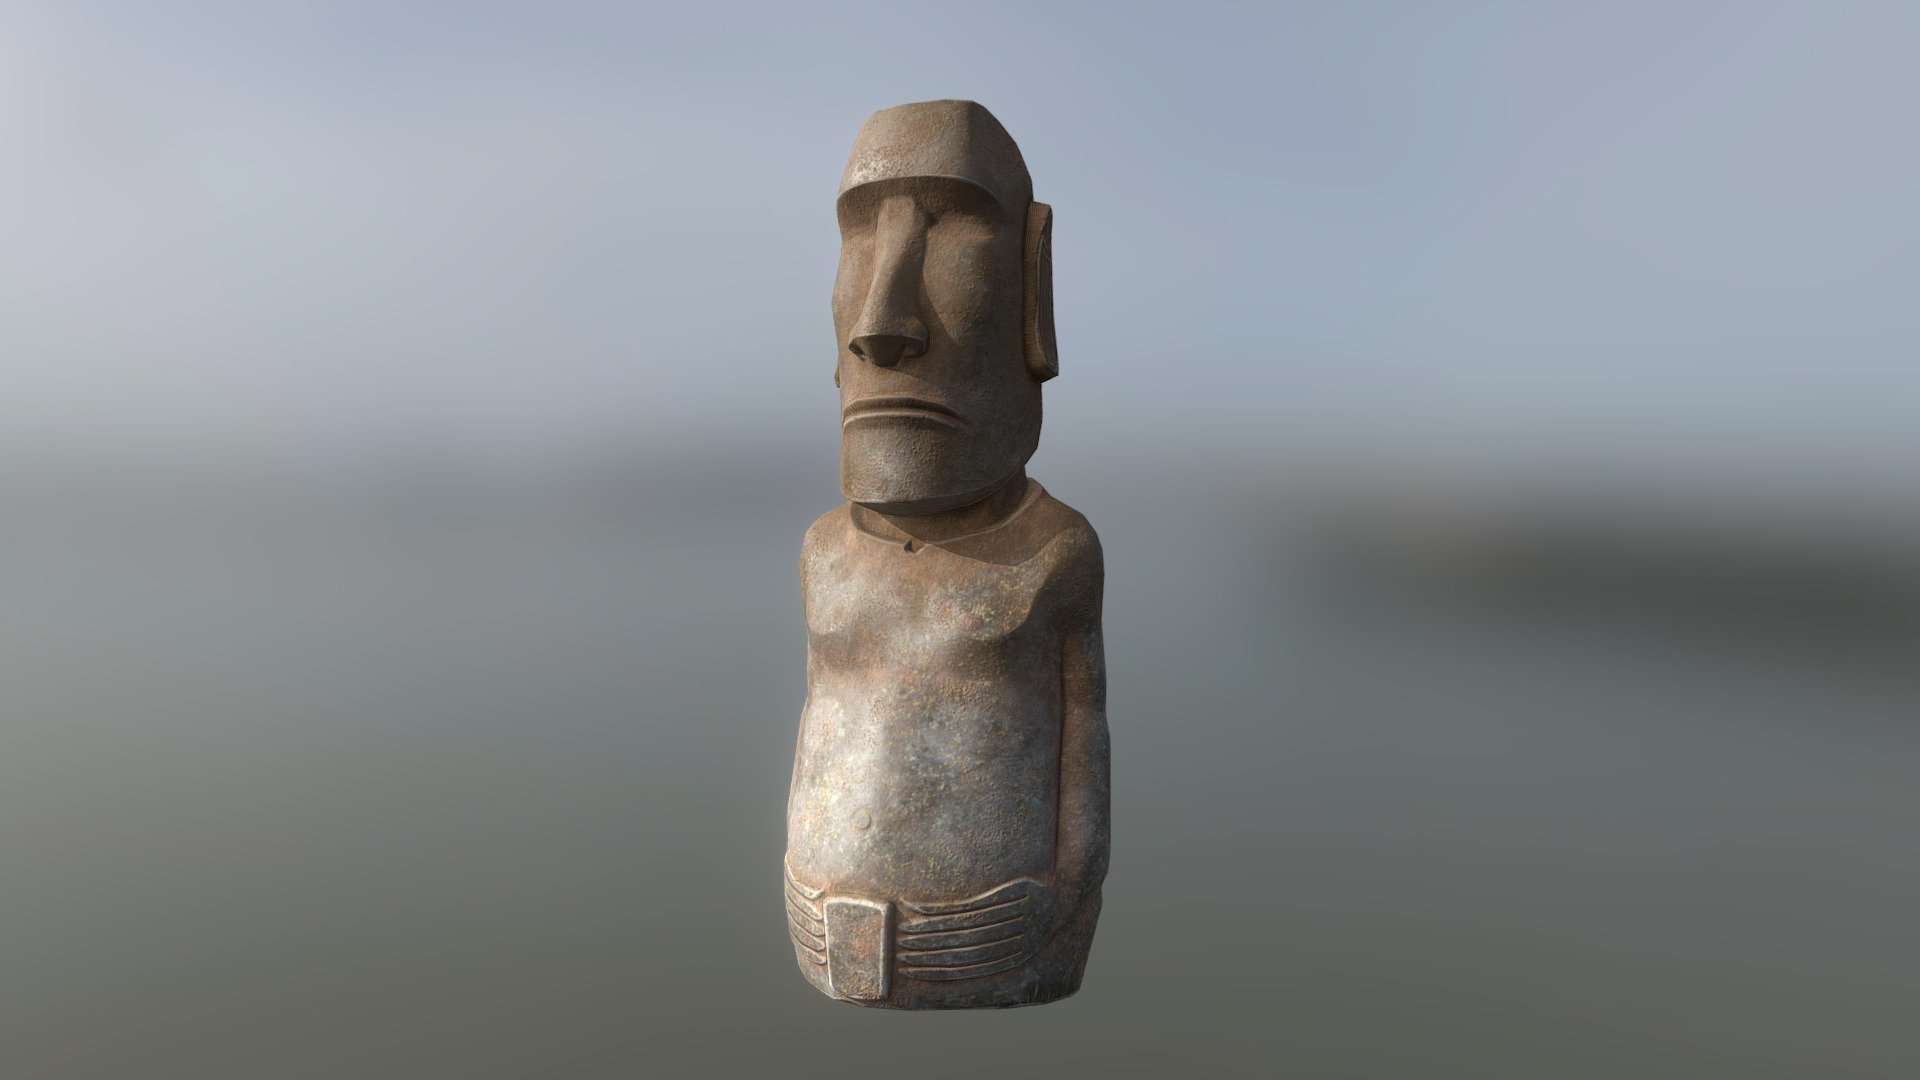 This beautifully created Easter Island Statue is perfect for games and well optimized for mobile platforms with strict limitations. It was created with Maya and ZBrush. Textured in Substance Painter. Download includes additional textures maps for Unity and Vray shaders 3d model